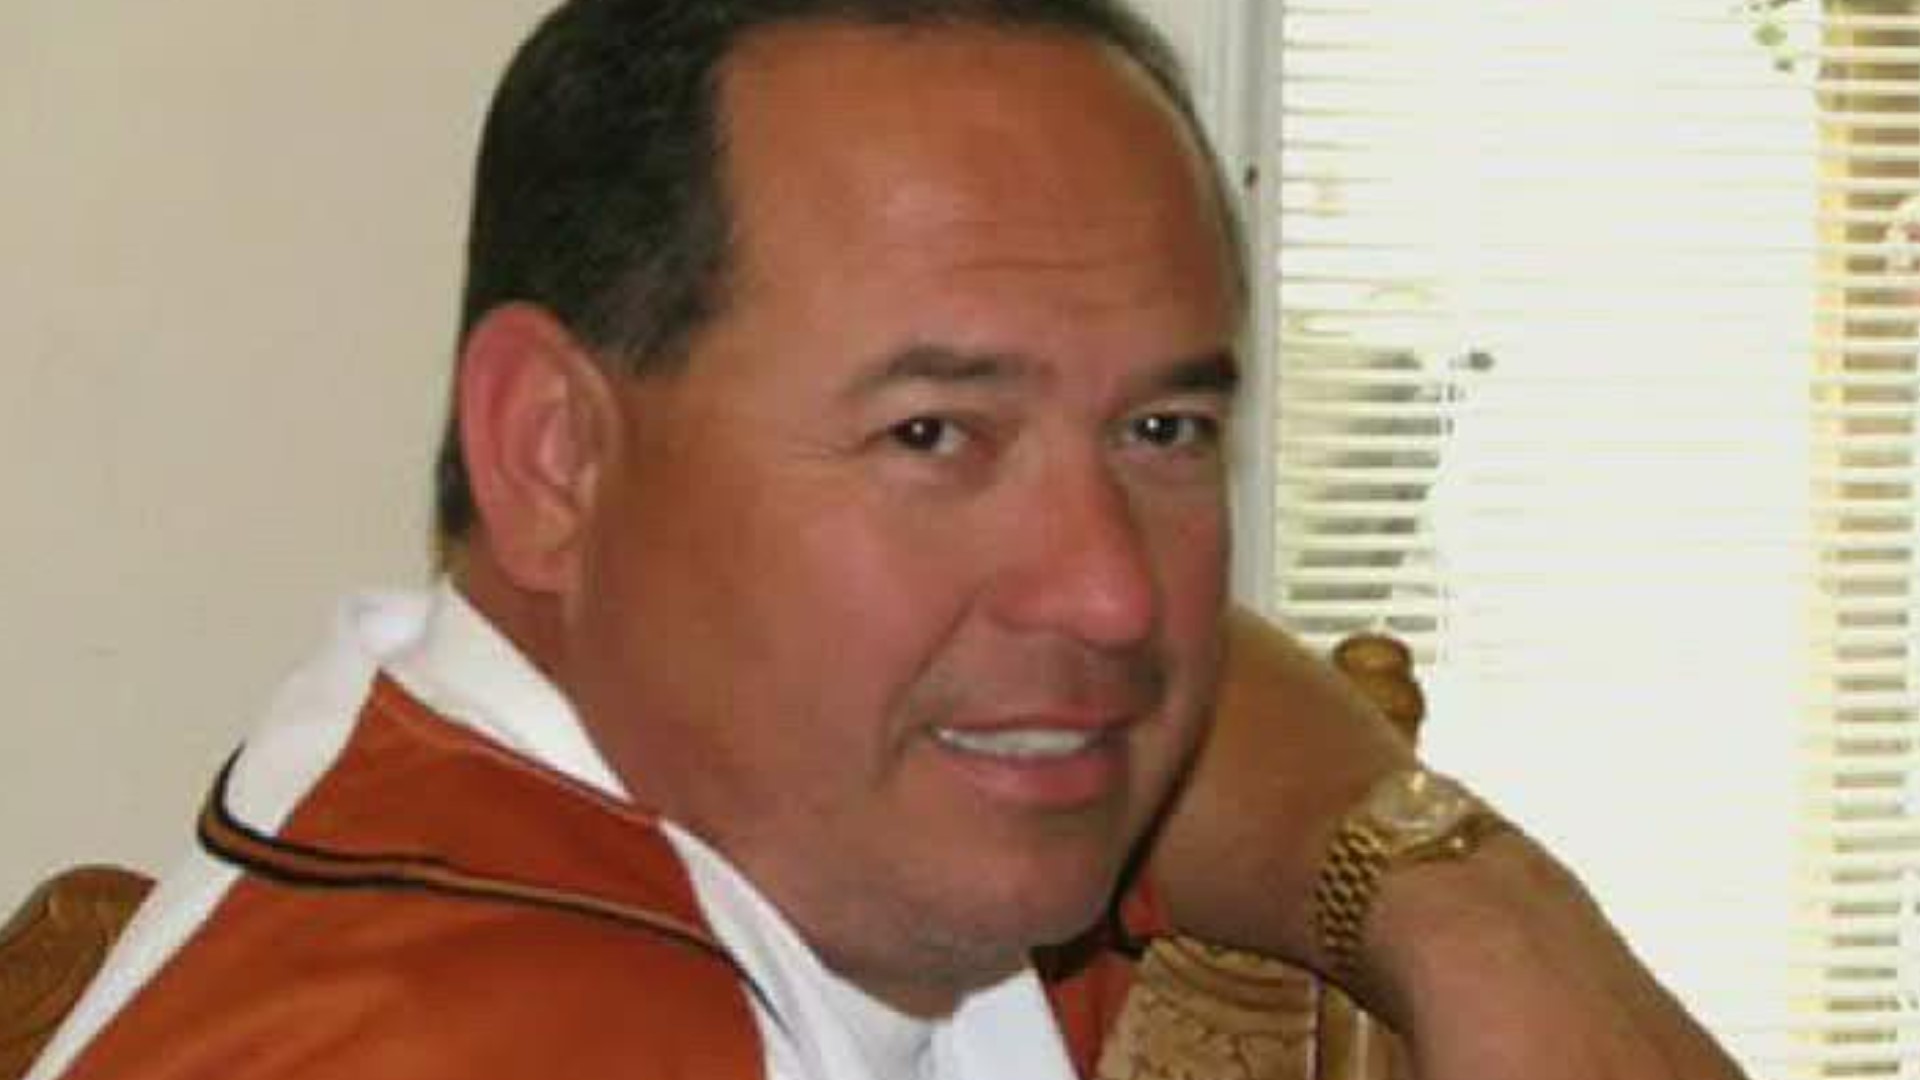 Lozano was shot and killed on August 17, 2010 while stopped at a southside Corpus Christi intersection.